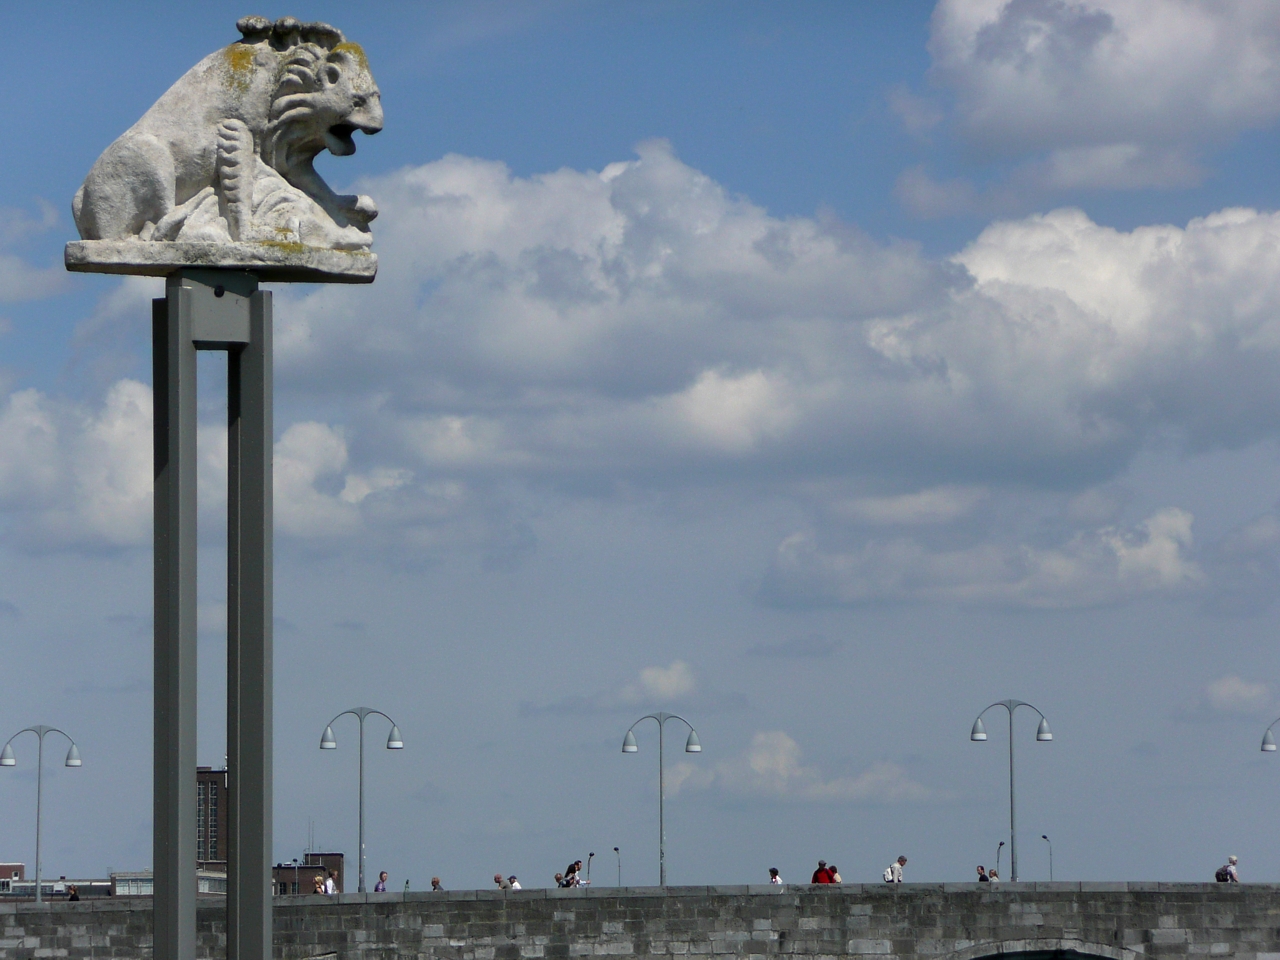 The Roman remains of a lion sculpture now marks the site of the original Roman bridge along the banks of the Maas River.  